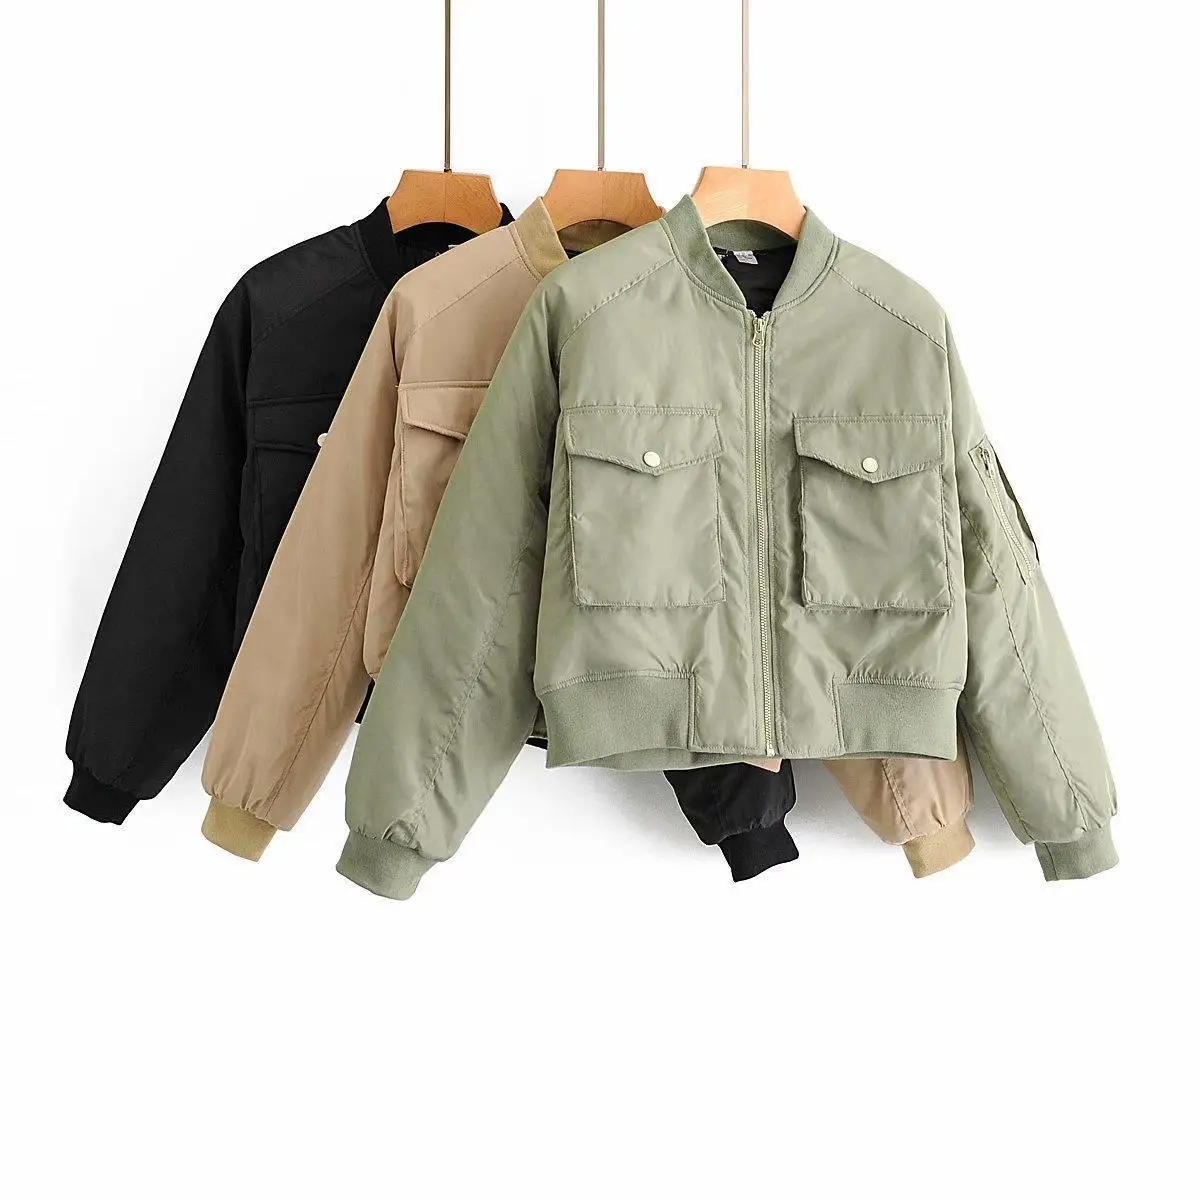 Traf Women Jackets Pilot Jacket with Cotton Short Coat Casual Clothes Street Fashion Tops Harajuku Vintage Zipper Coats Dropship an extraordinary exhibition of seeing with the fingertips all and deck magic tricks finger close up street stage magic trick